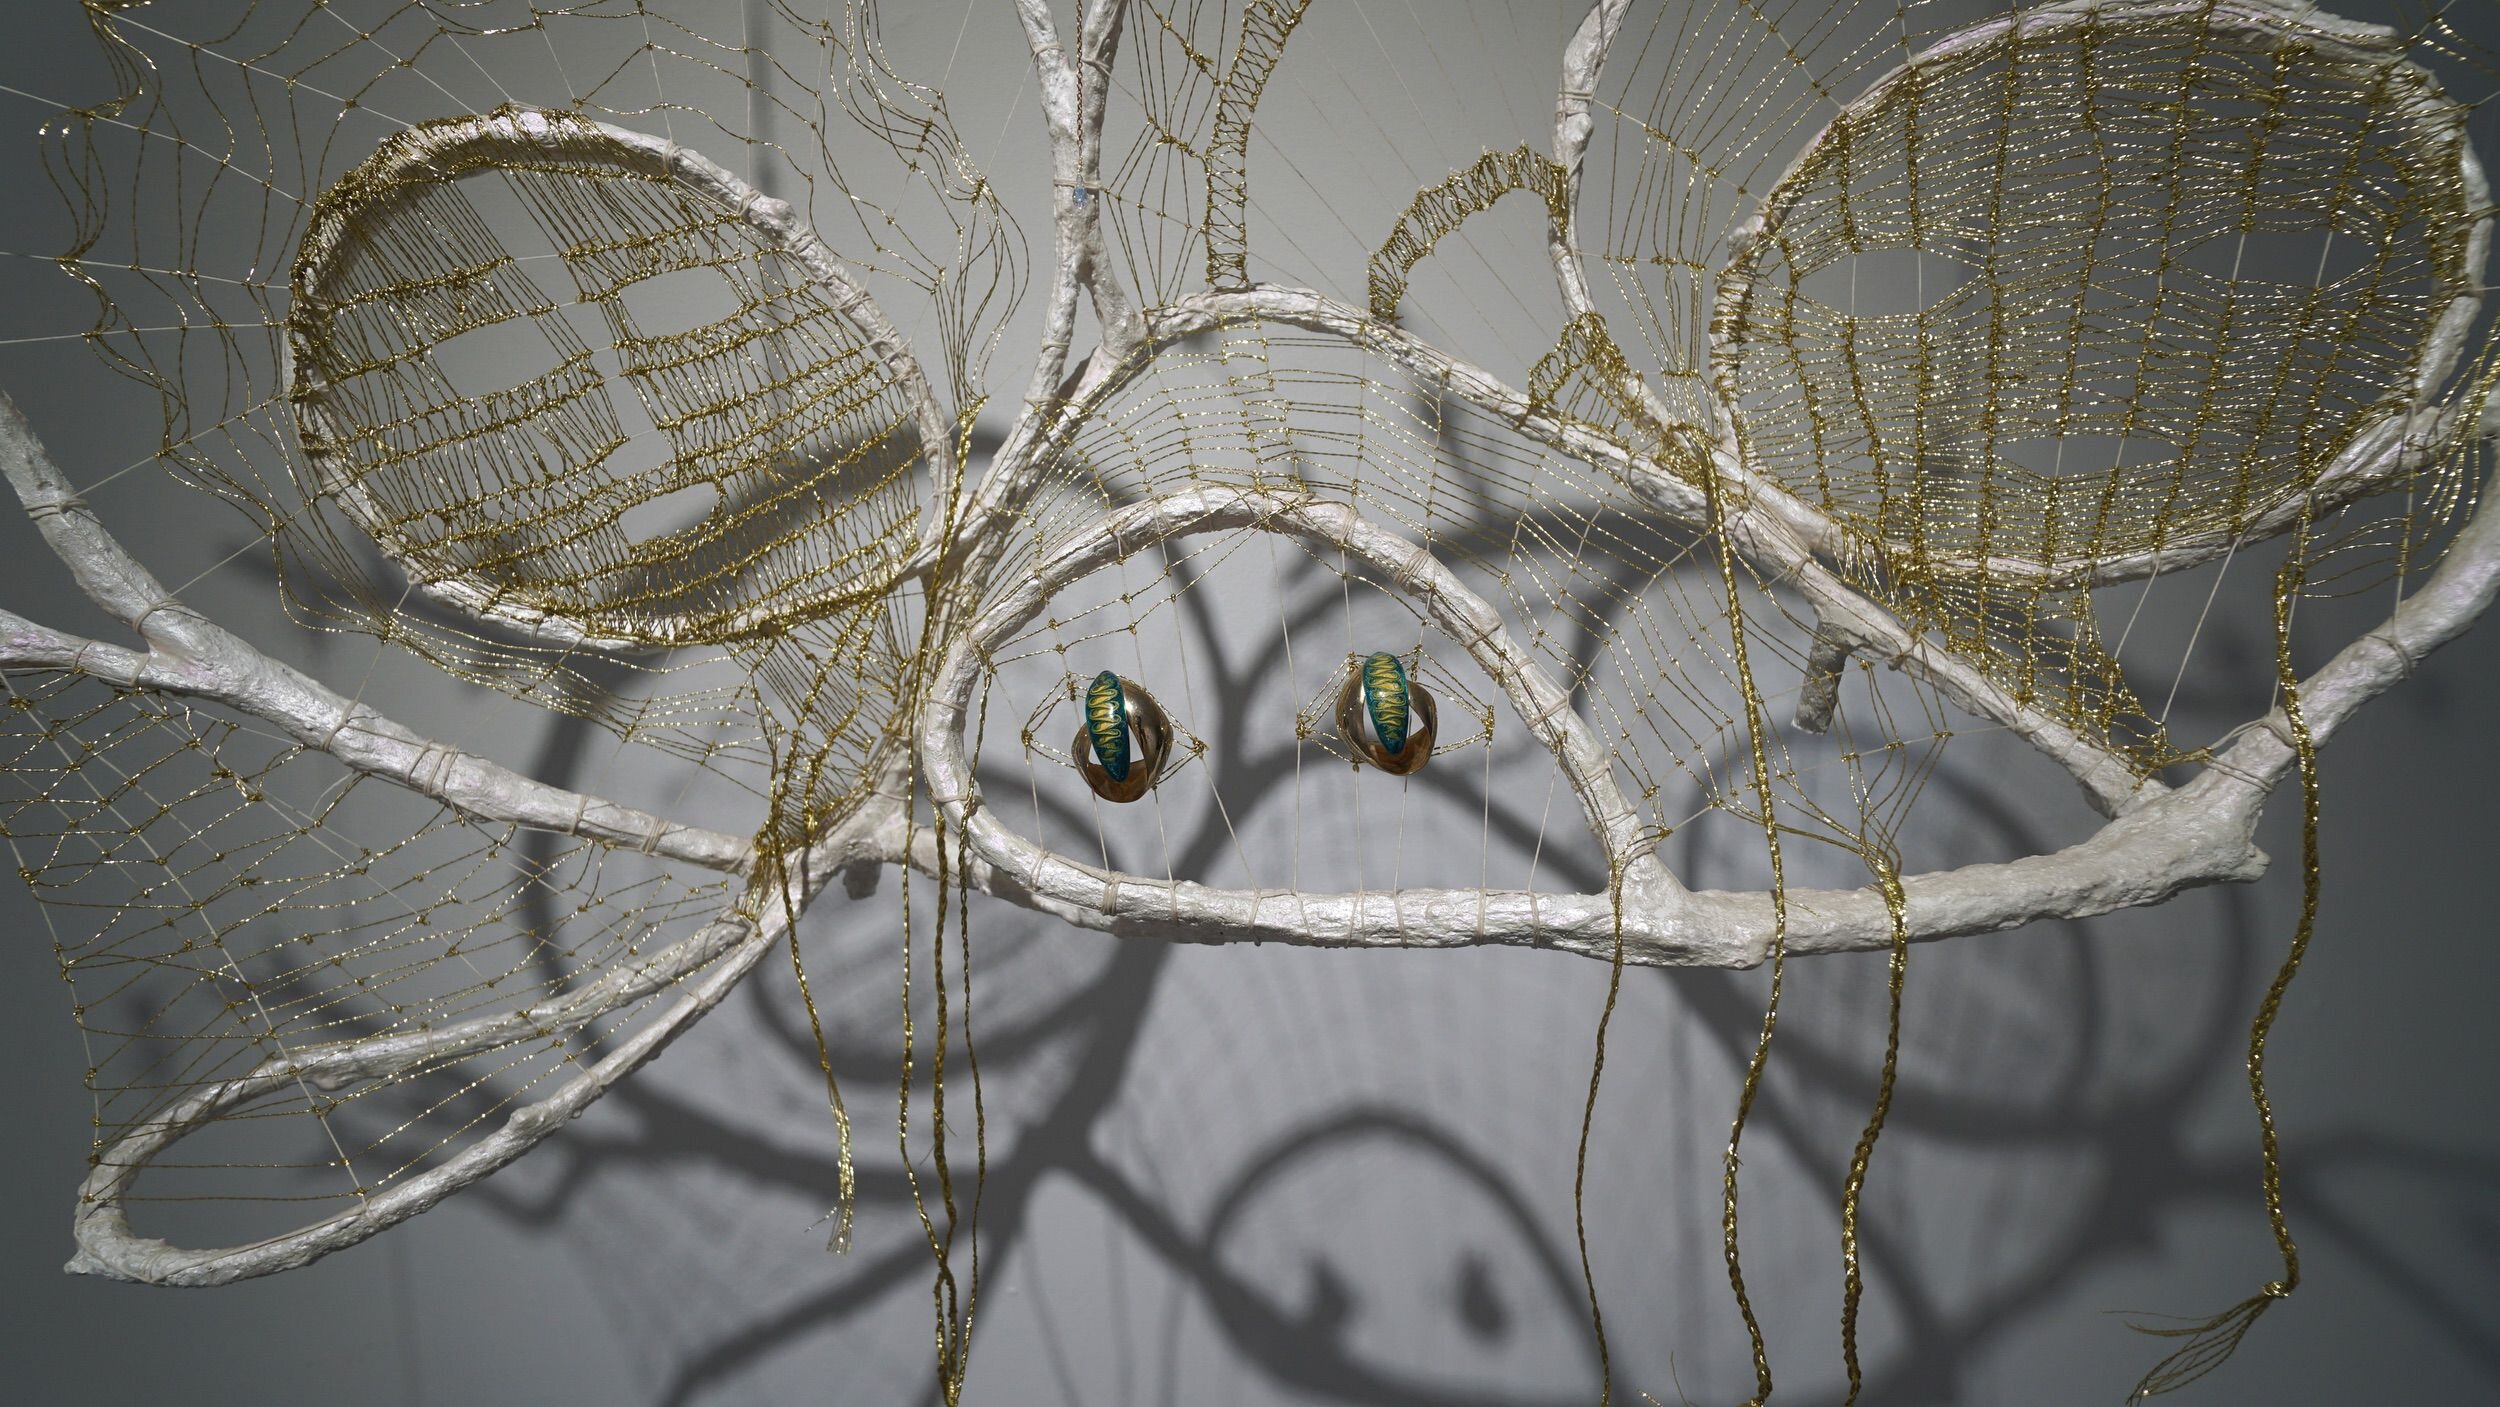  Mindy Rose Schwartz - Detail view    Glance Back , 2020 Branches, reeds, wire, resin, linen cord, lamé cord, earrings, crystals, fake flowers, chain 50 x 51 x 13 in 127 x 129.5 x 33 cm 